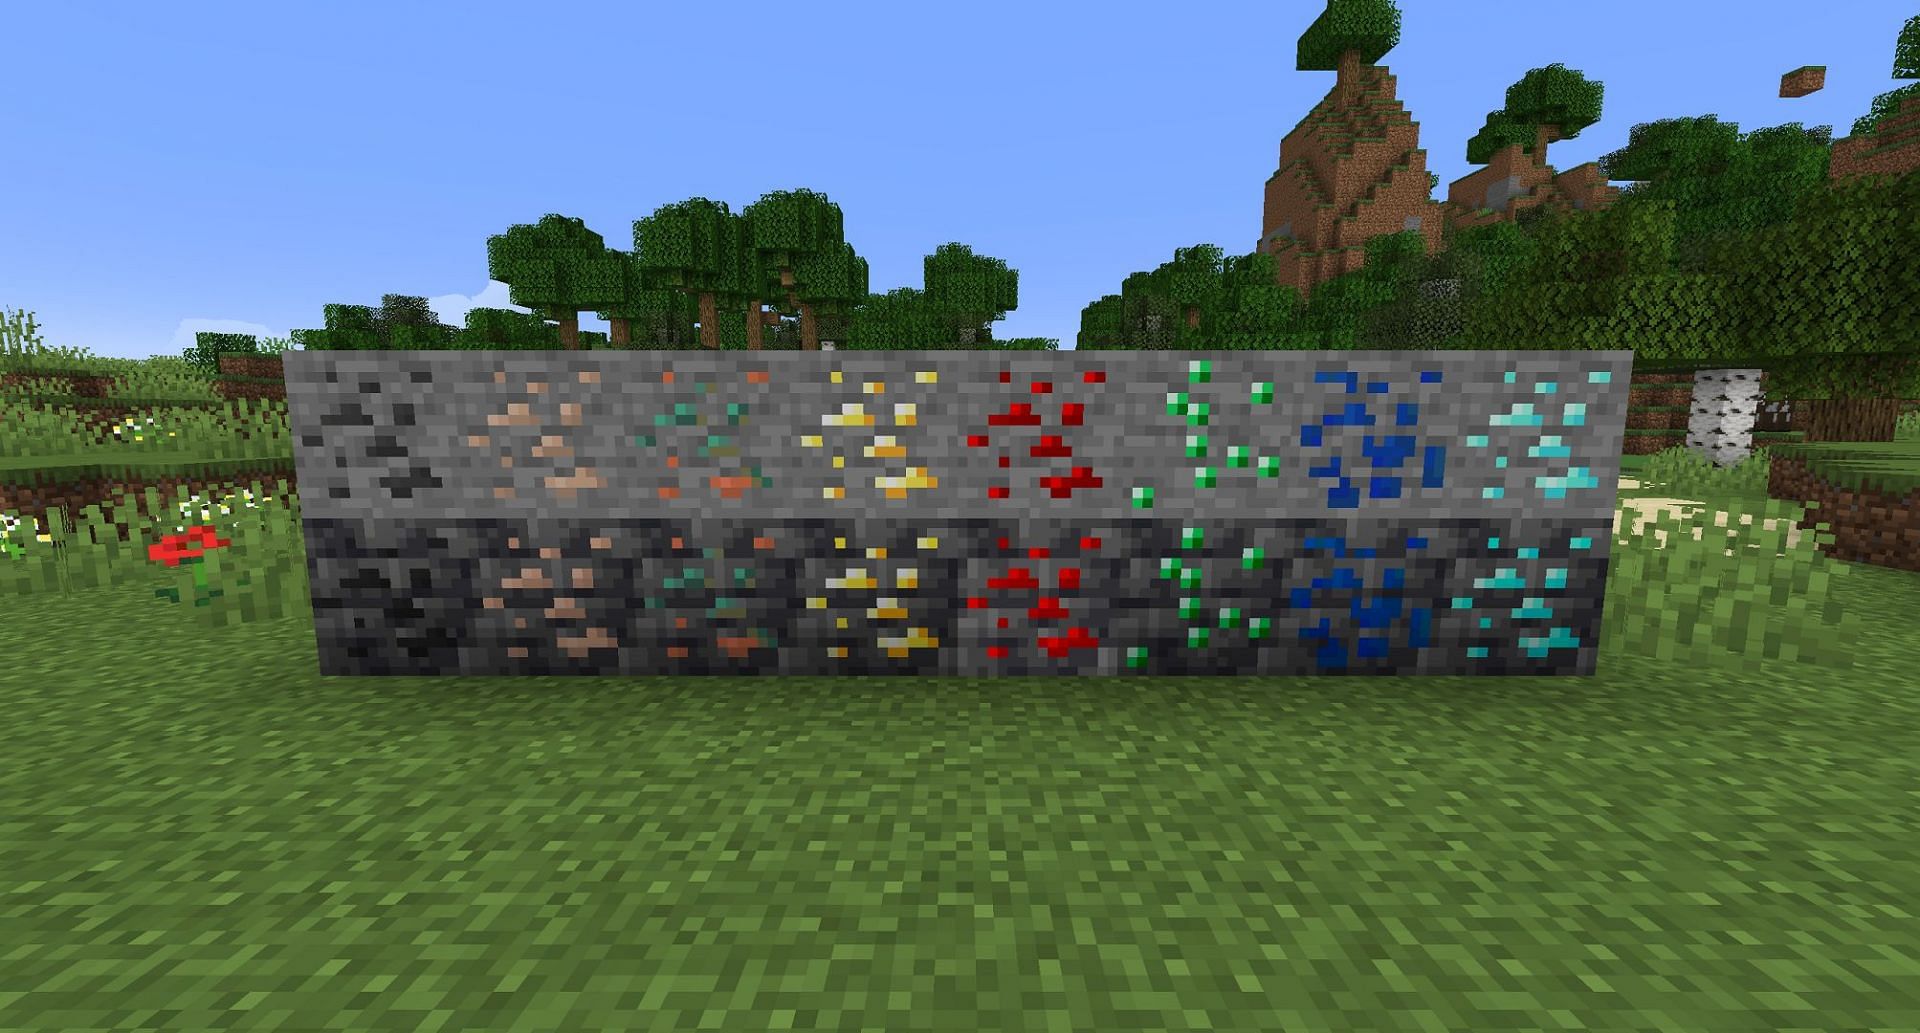 This pack restores the original ore textures of the game (Image via G2_Games/CurseForge)